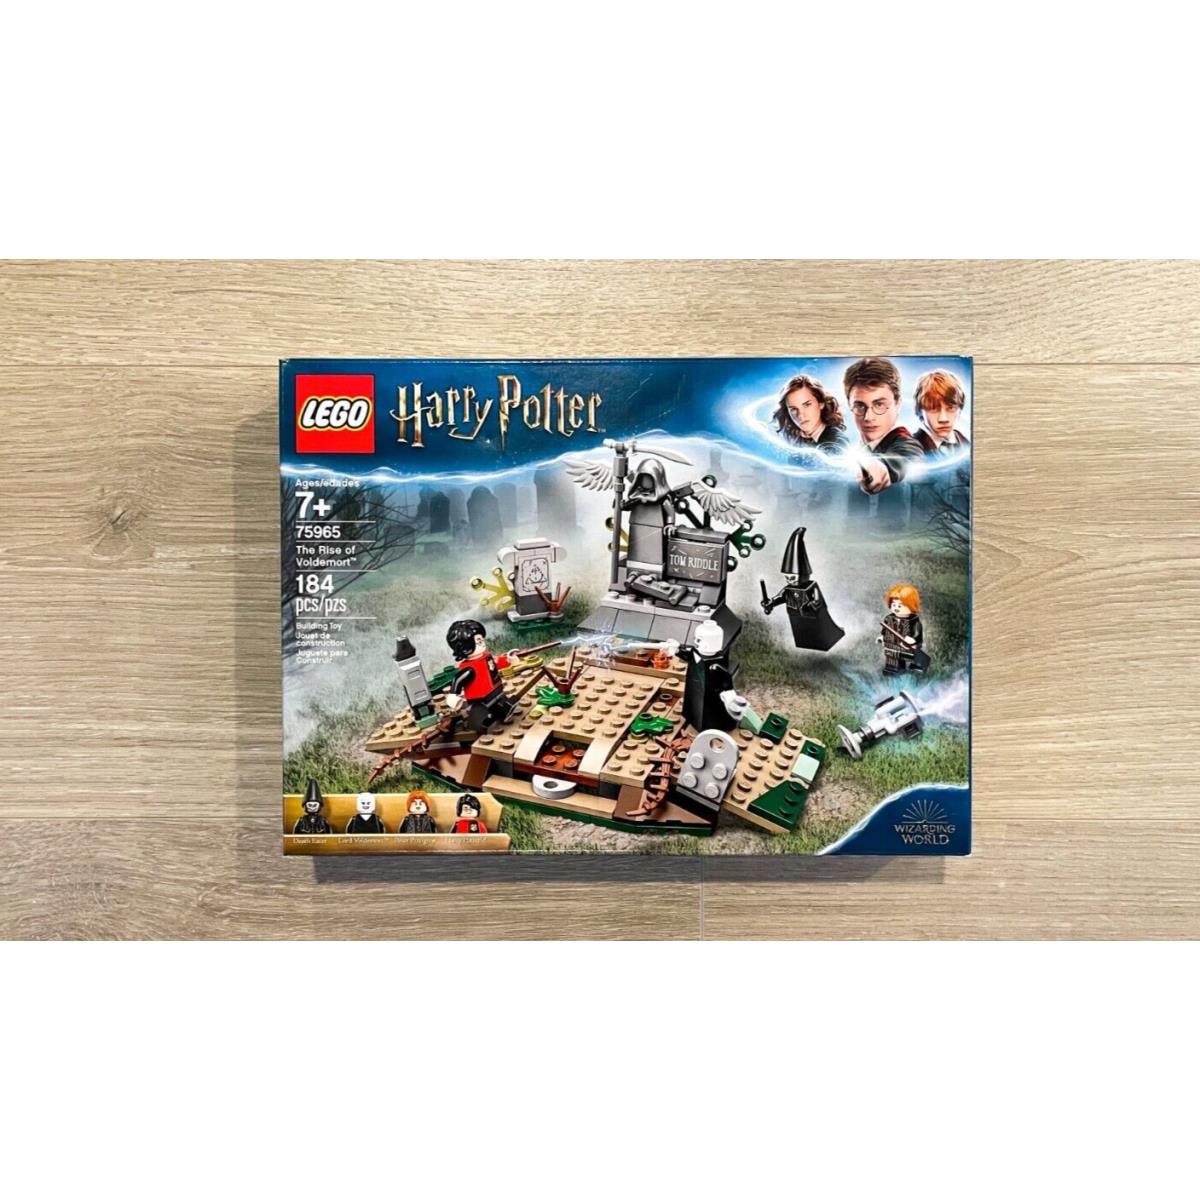 Lego Harry Potter - 75965 - The Rise of Voldemort